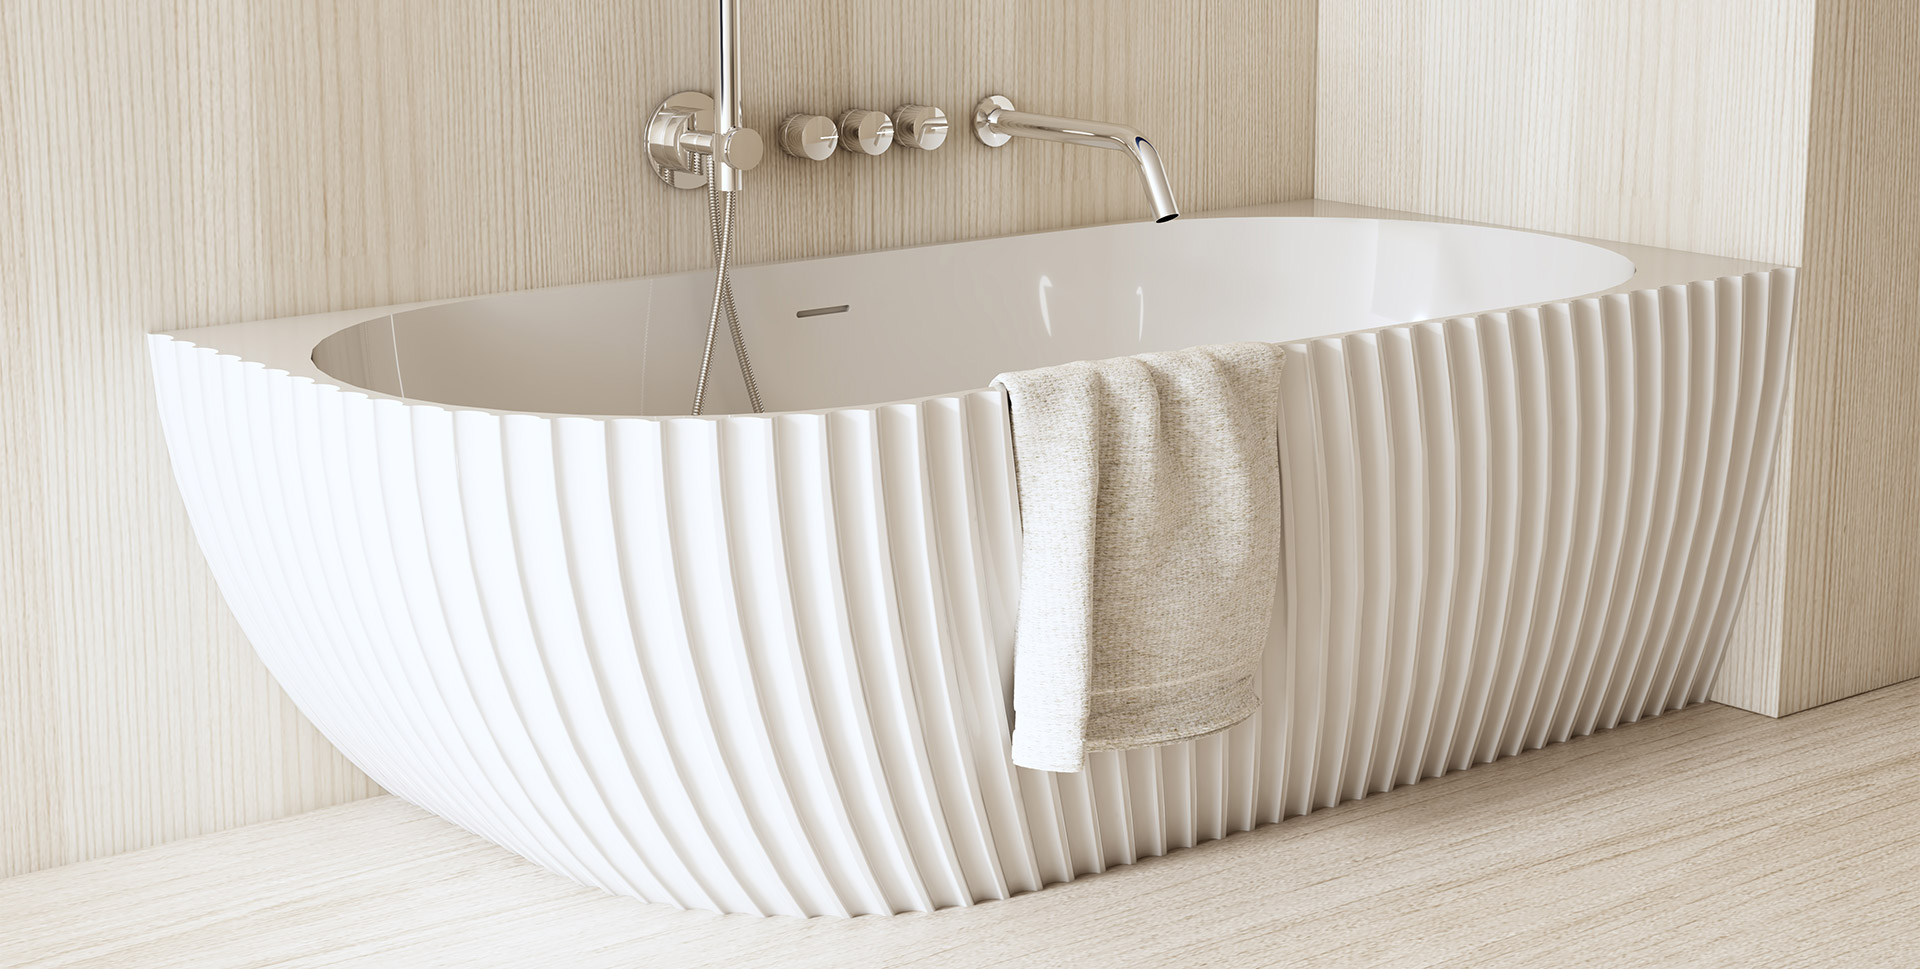 If you want to take a comfortable bath in the bathtub, you have to choose the bathtub like this.